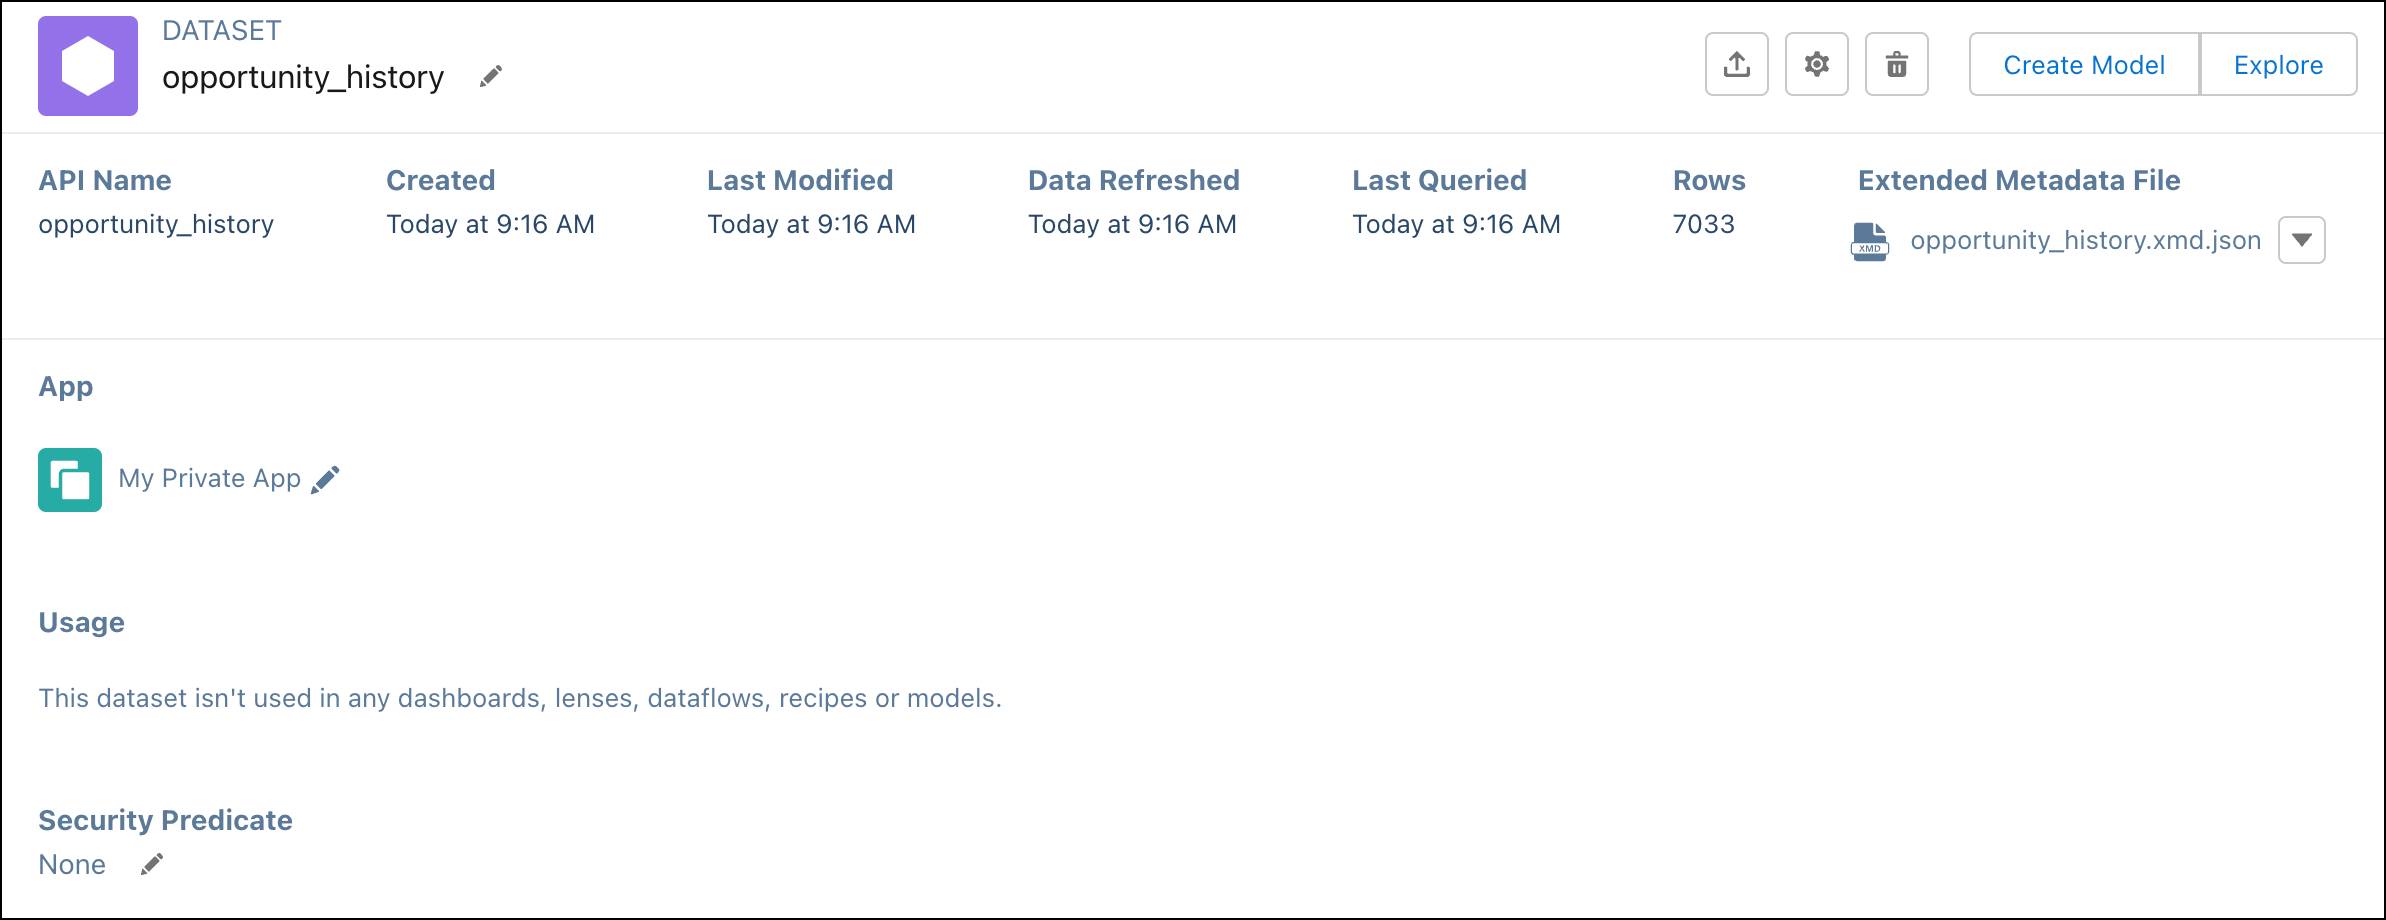 Summary screen of new opportunity_history dataset created from uploaded CSV file